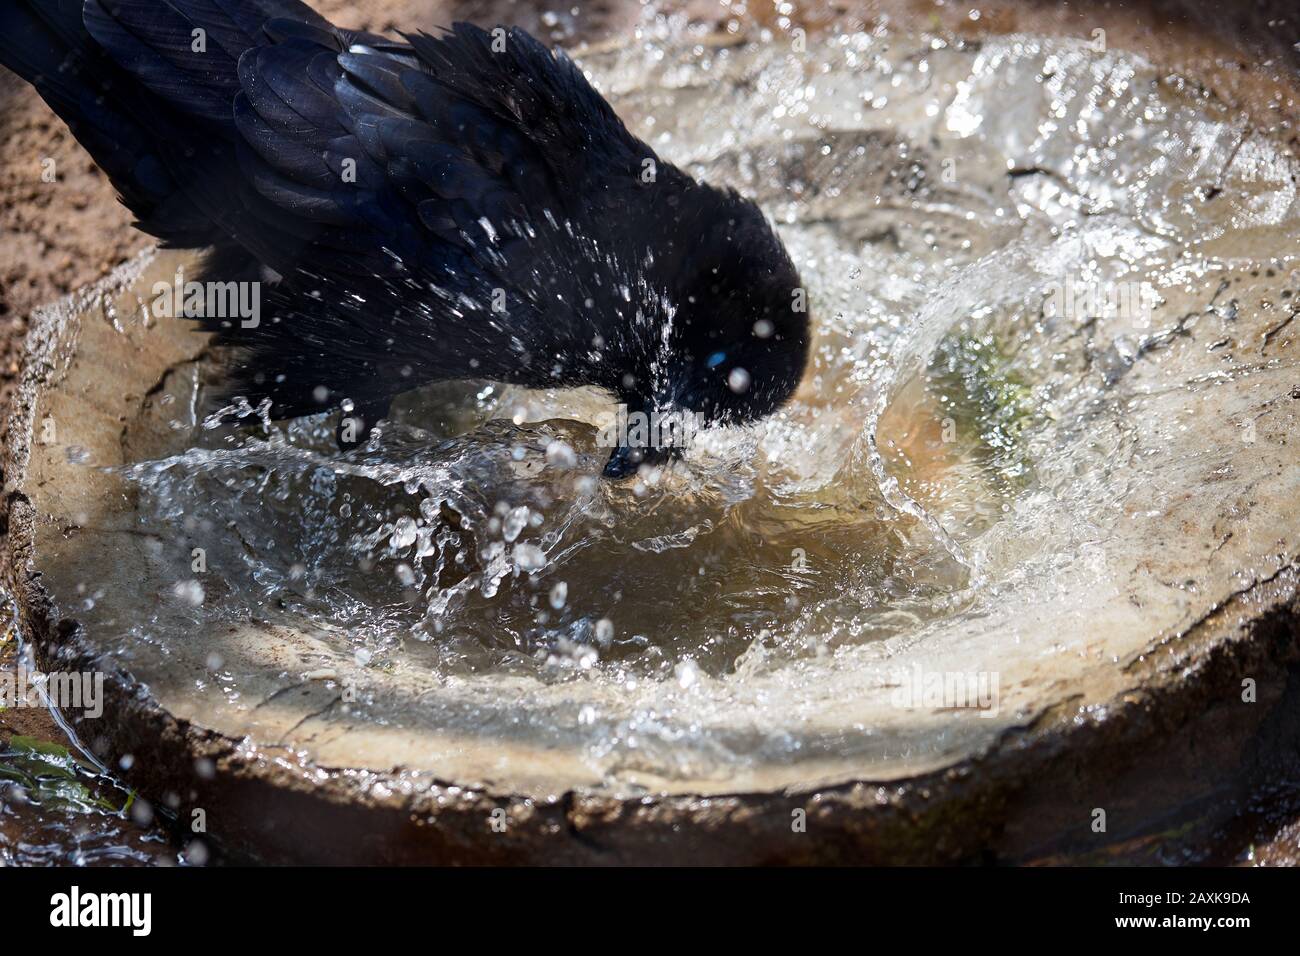 Black Raven Quenches Thirst Hot Sunny Sultry Summer Day And Takes A Shower In Splashes And Drops